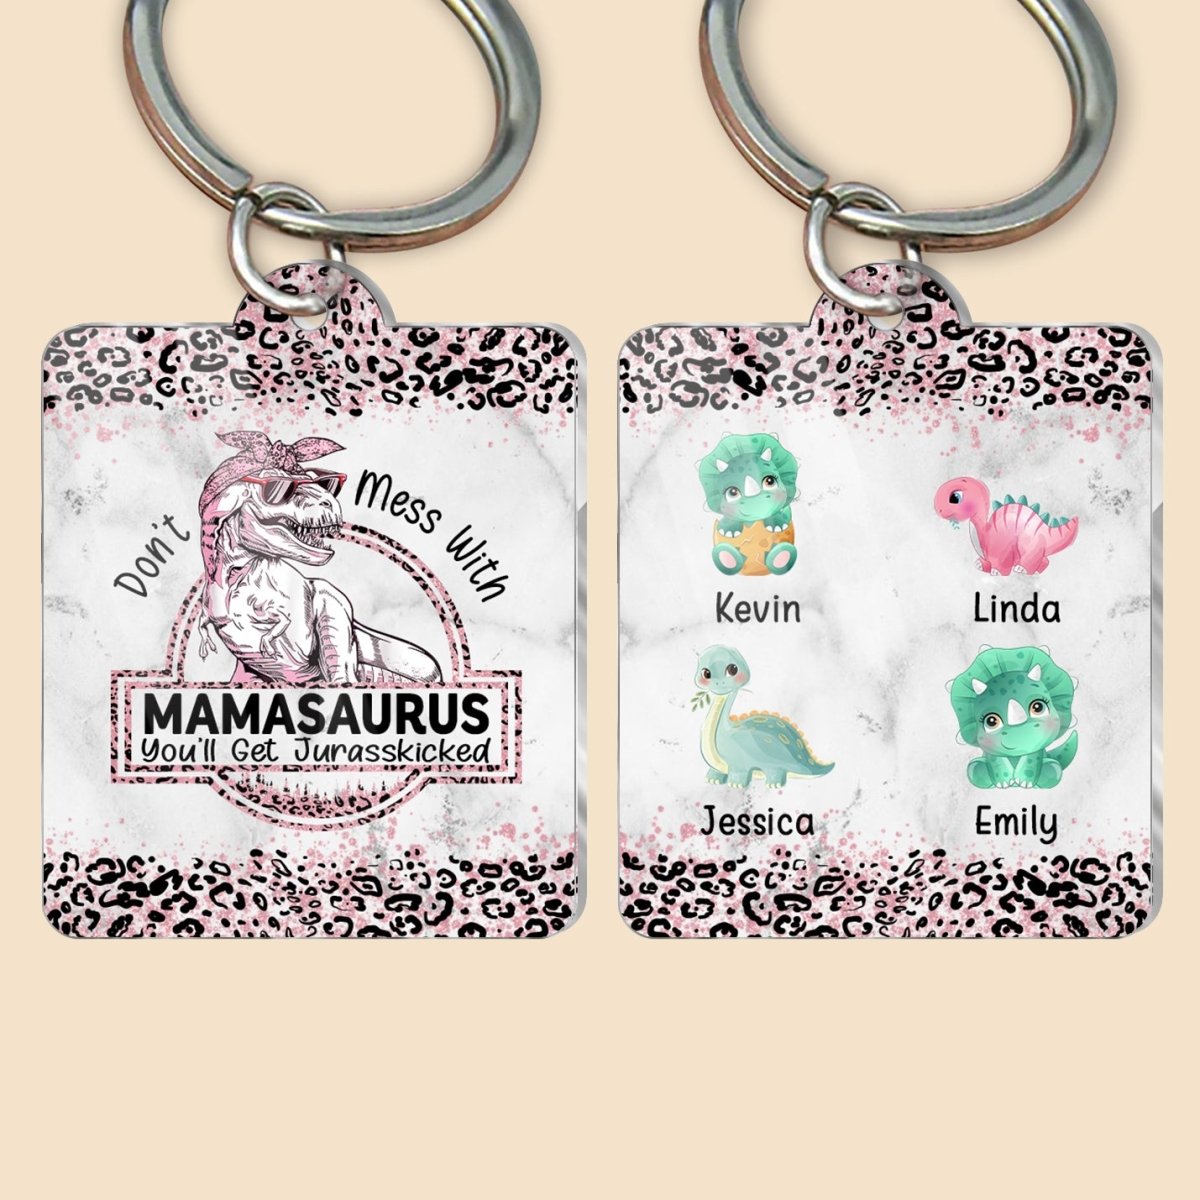 Don't Mess With Mamasaurus/Grandmasaurus Leopard Pattern - Personalized Acrylic Keychain - Best Gift For Mother, Grandma